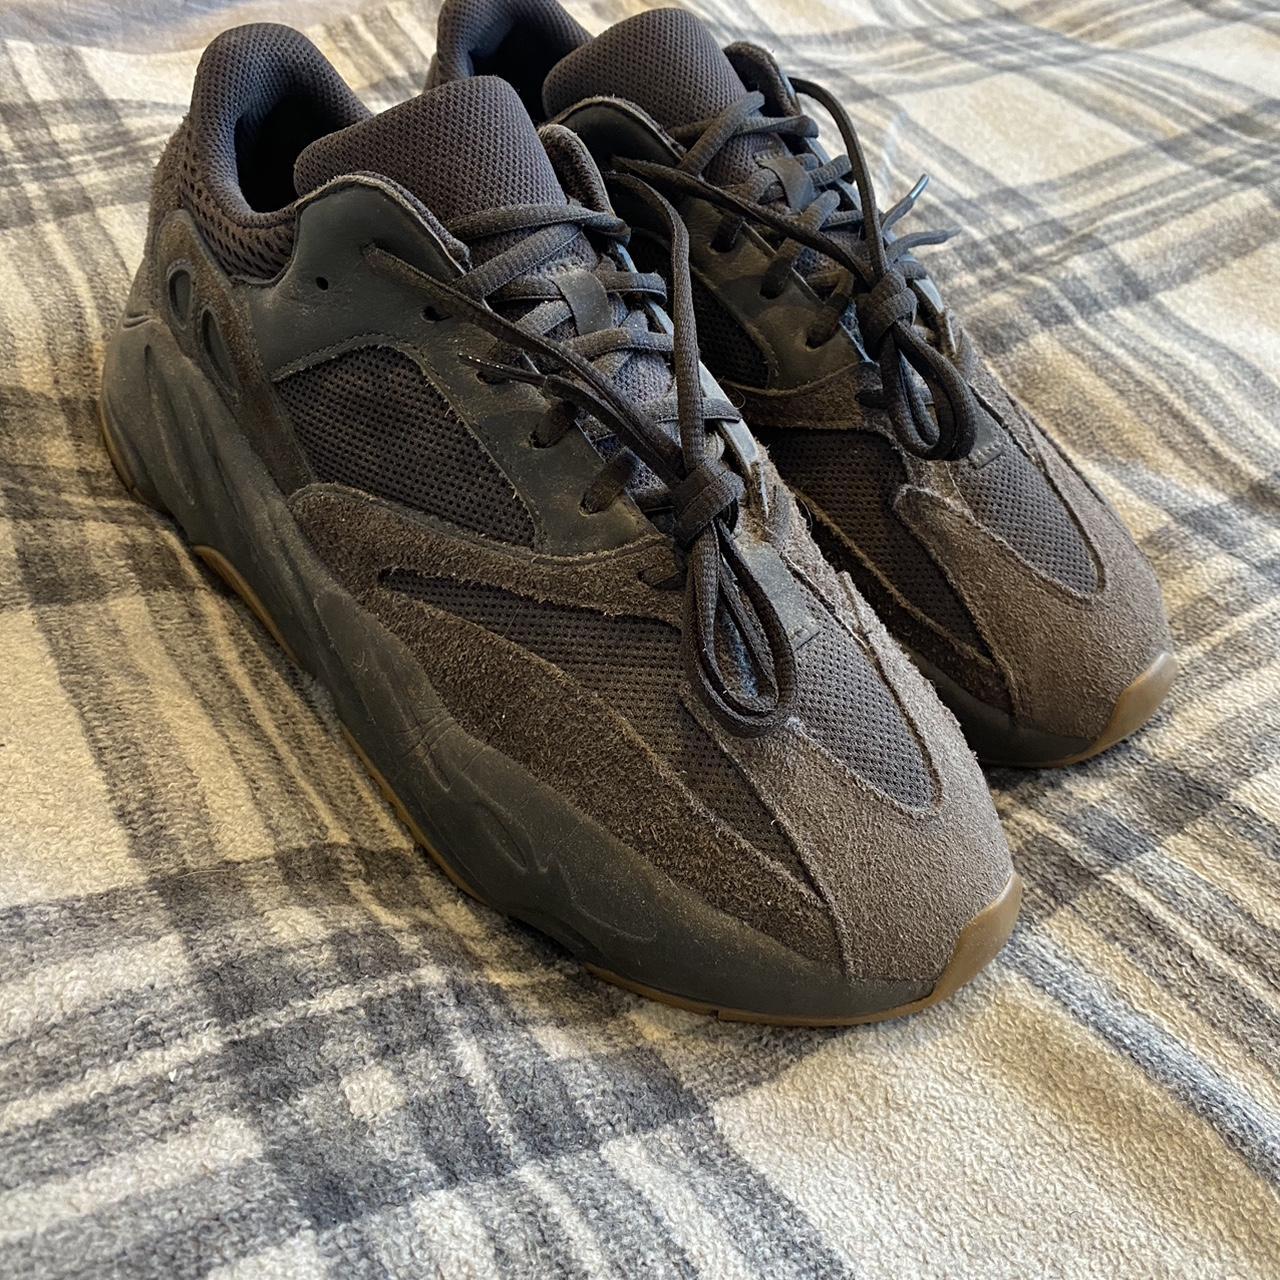 Adidas Yeezy Boost 700 Utility Black in UK 11.5 with... - Depop